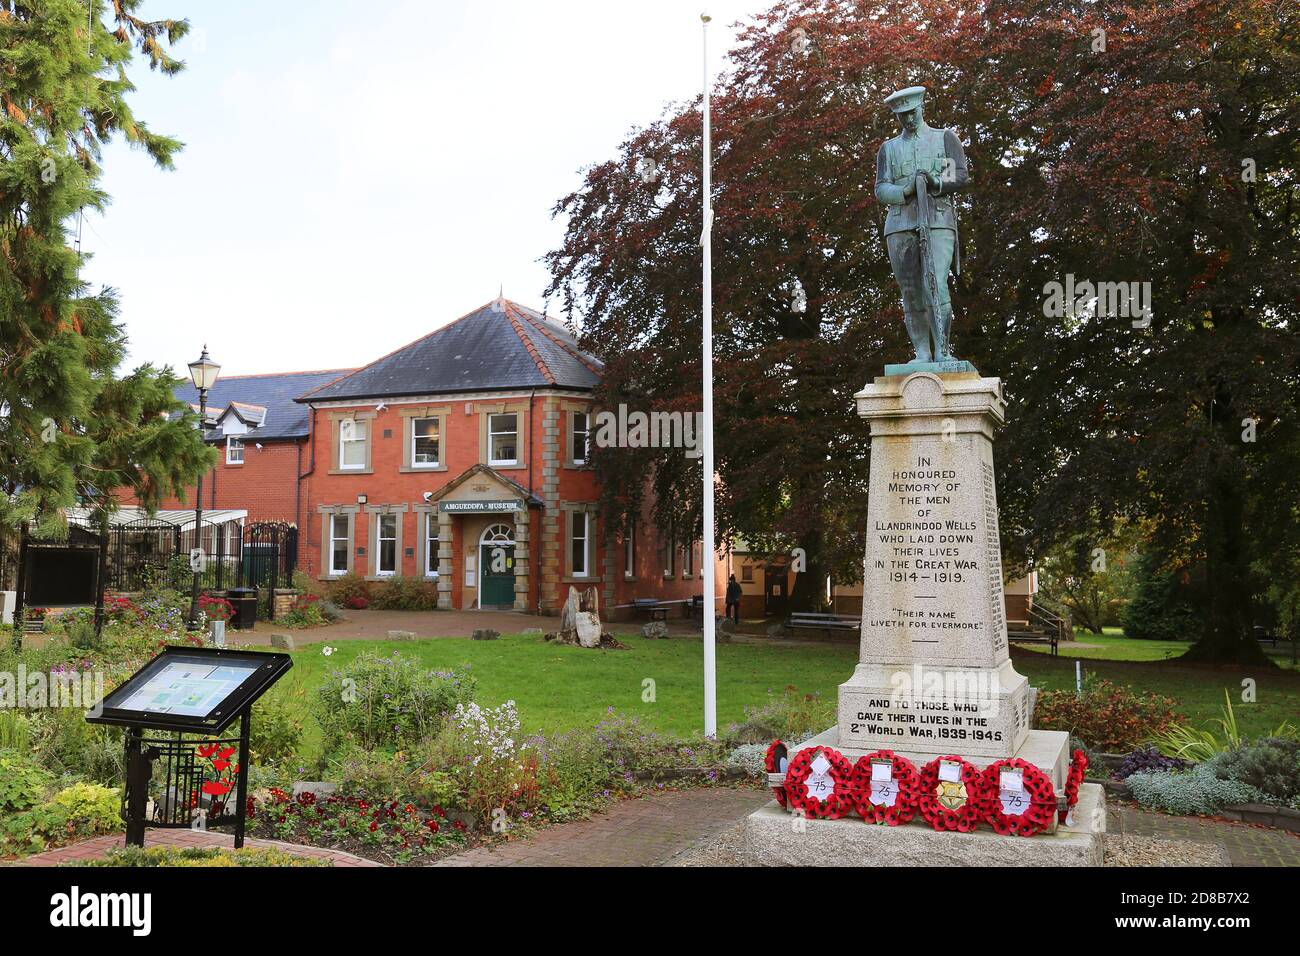 Radnorshire Museum and War Memorial, Temple Street, Llandrindod Wells, Radnorshire, Powys, Wales, Great Britain, United Kingdom, UK, Europe Stock Photo